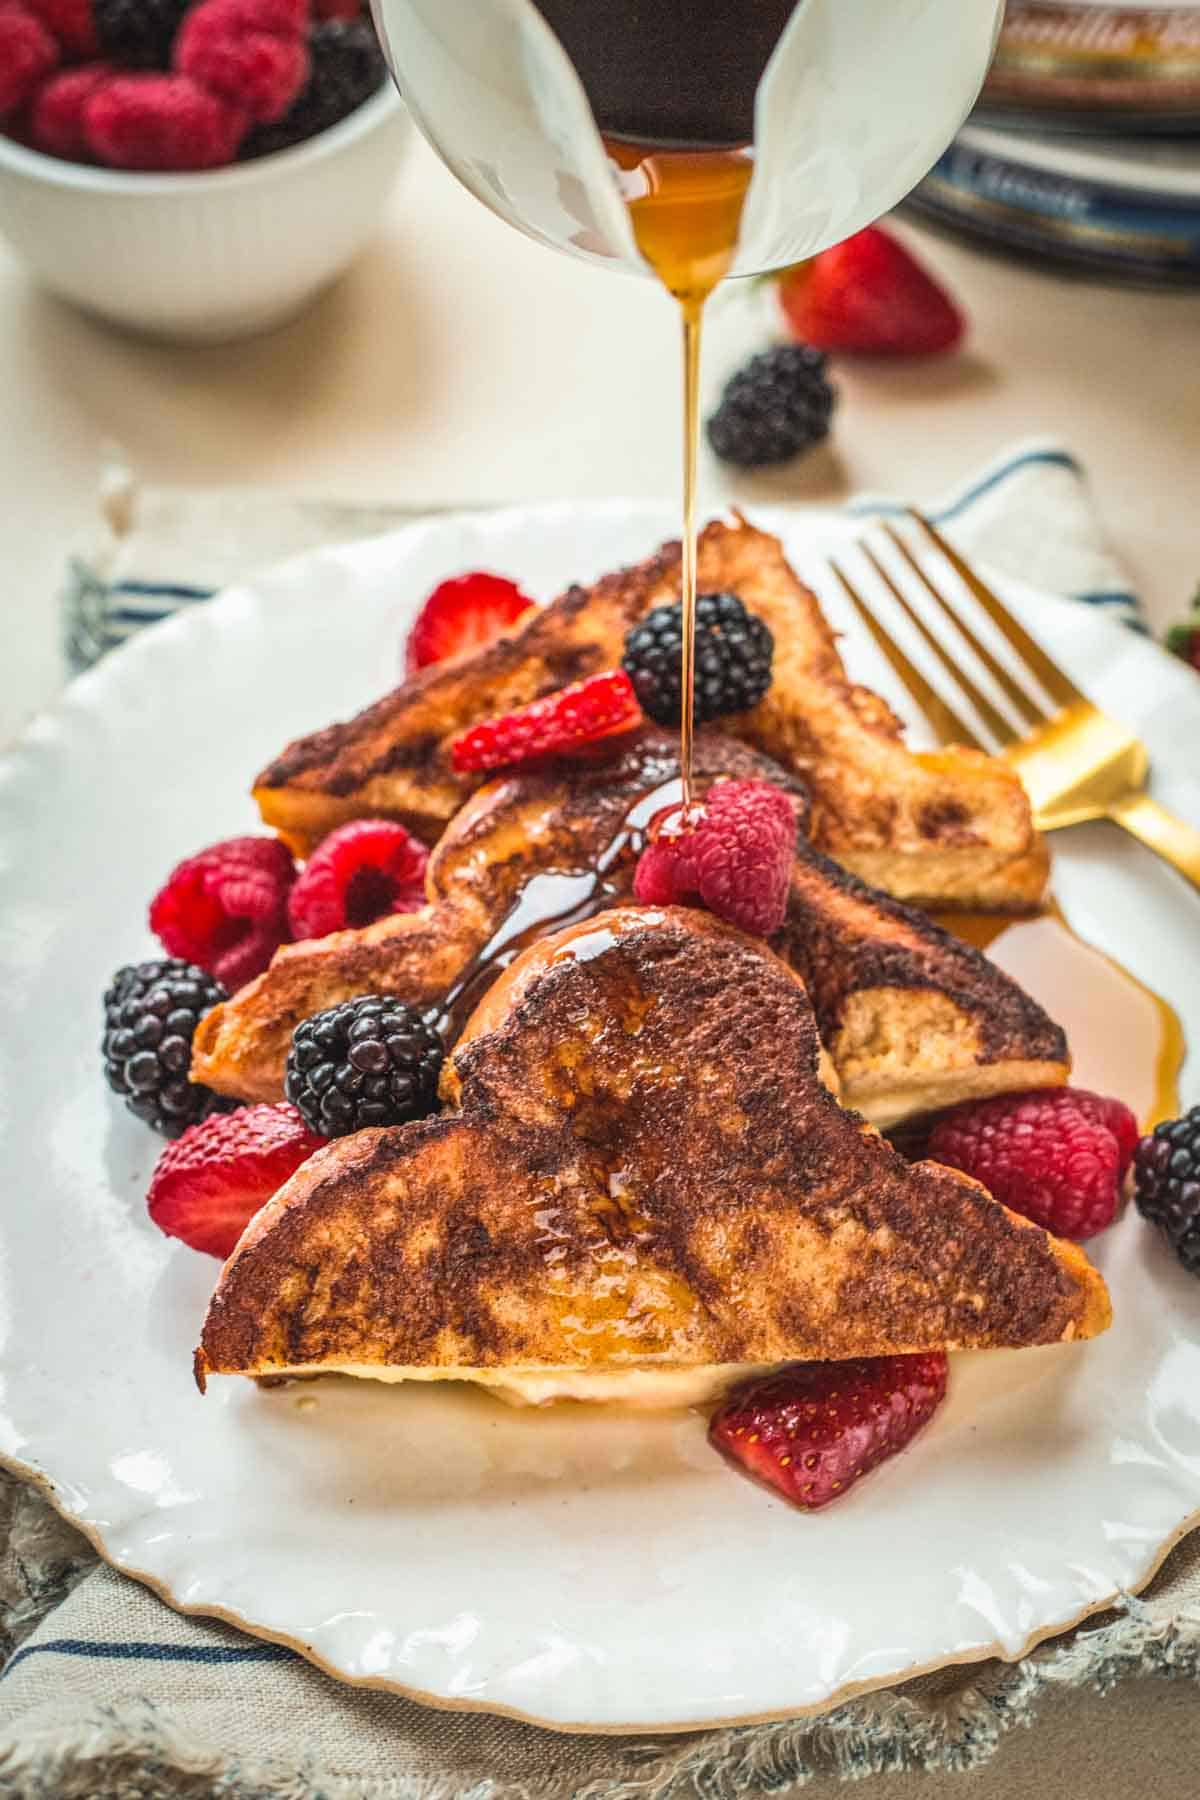 Maple syrup being drizzled on a plate of stuffed French toast.